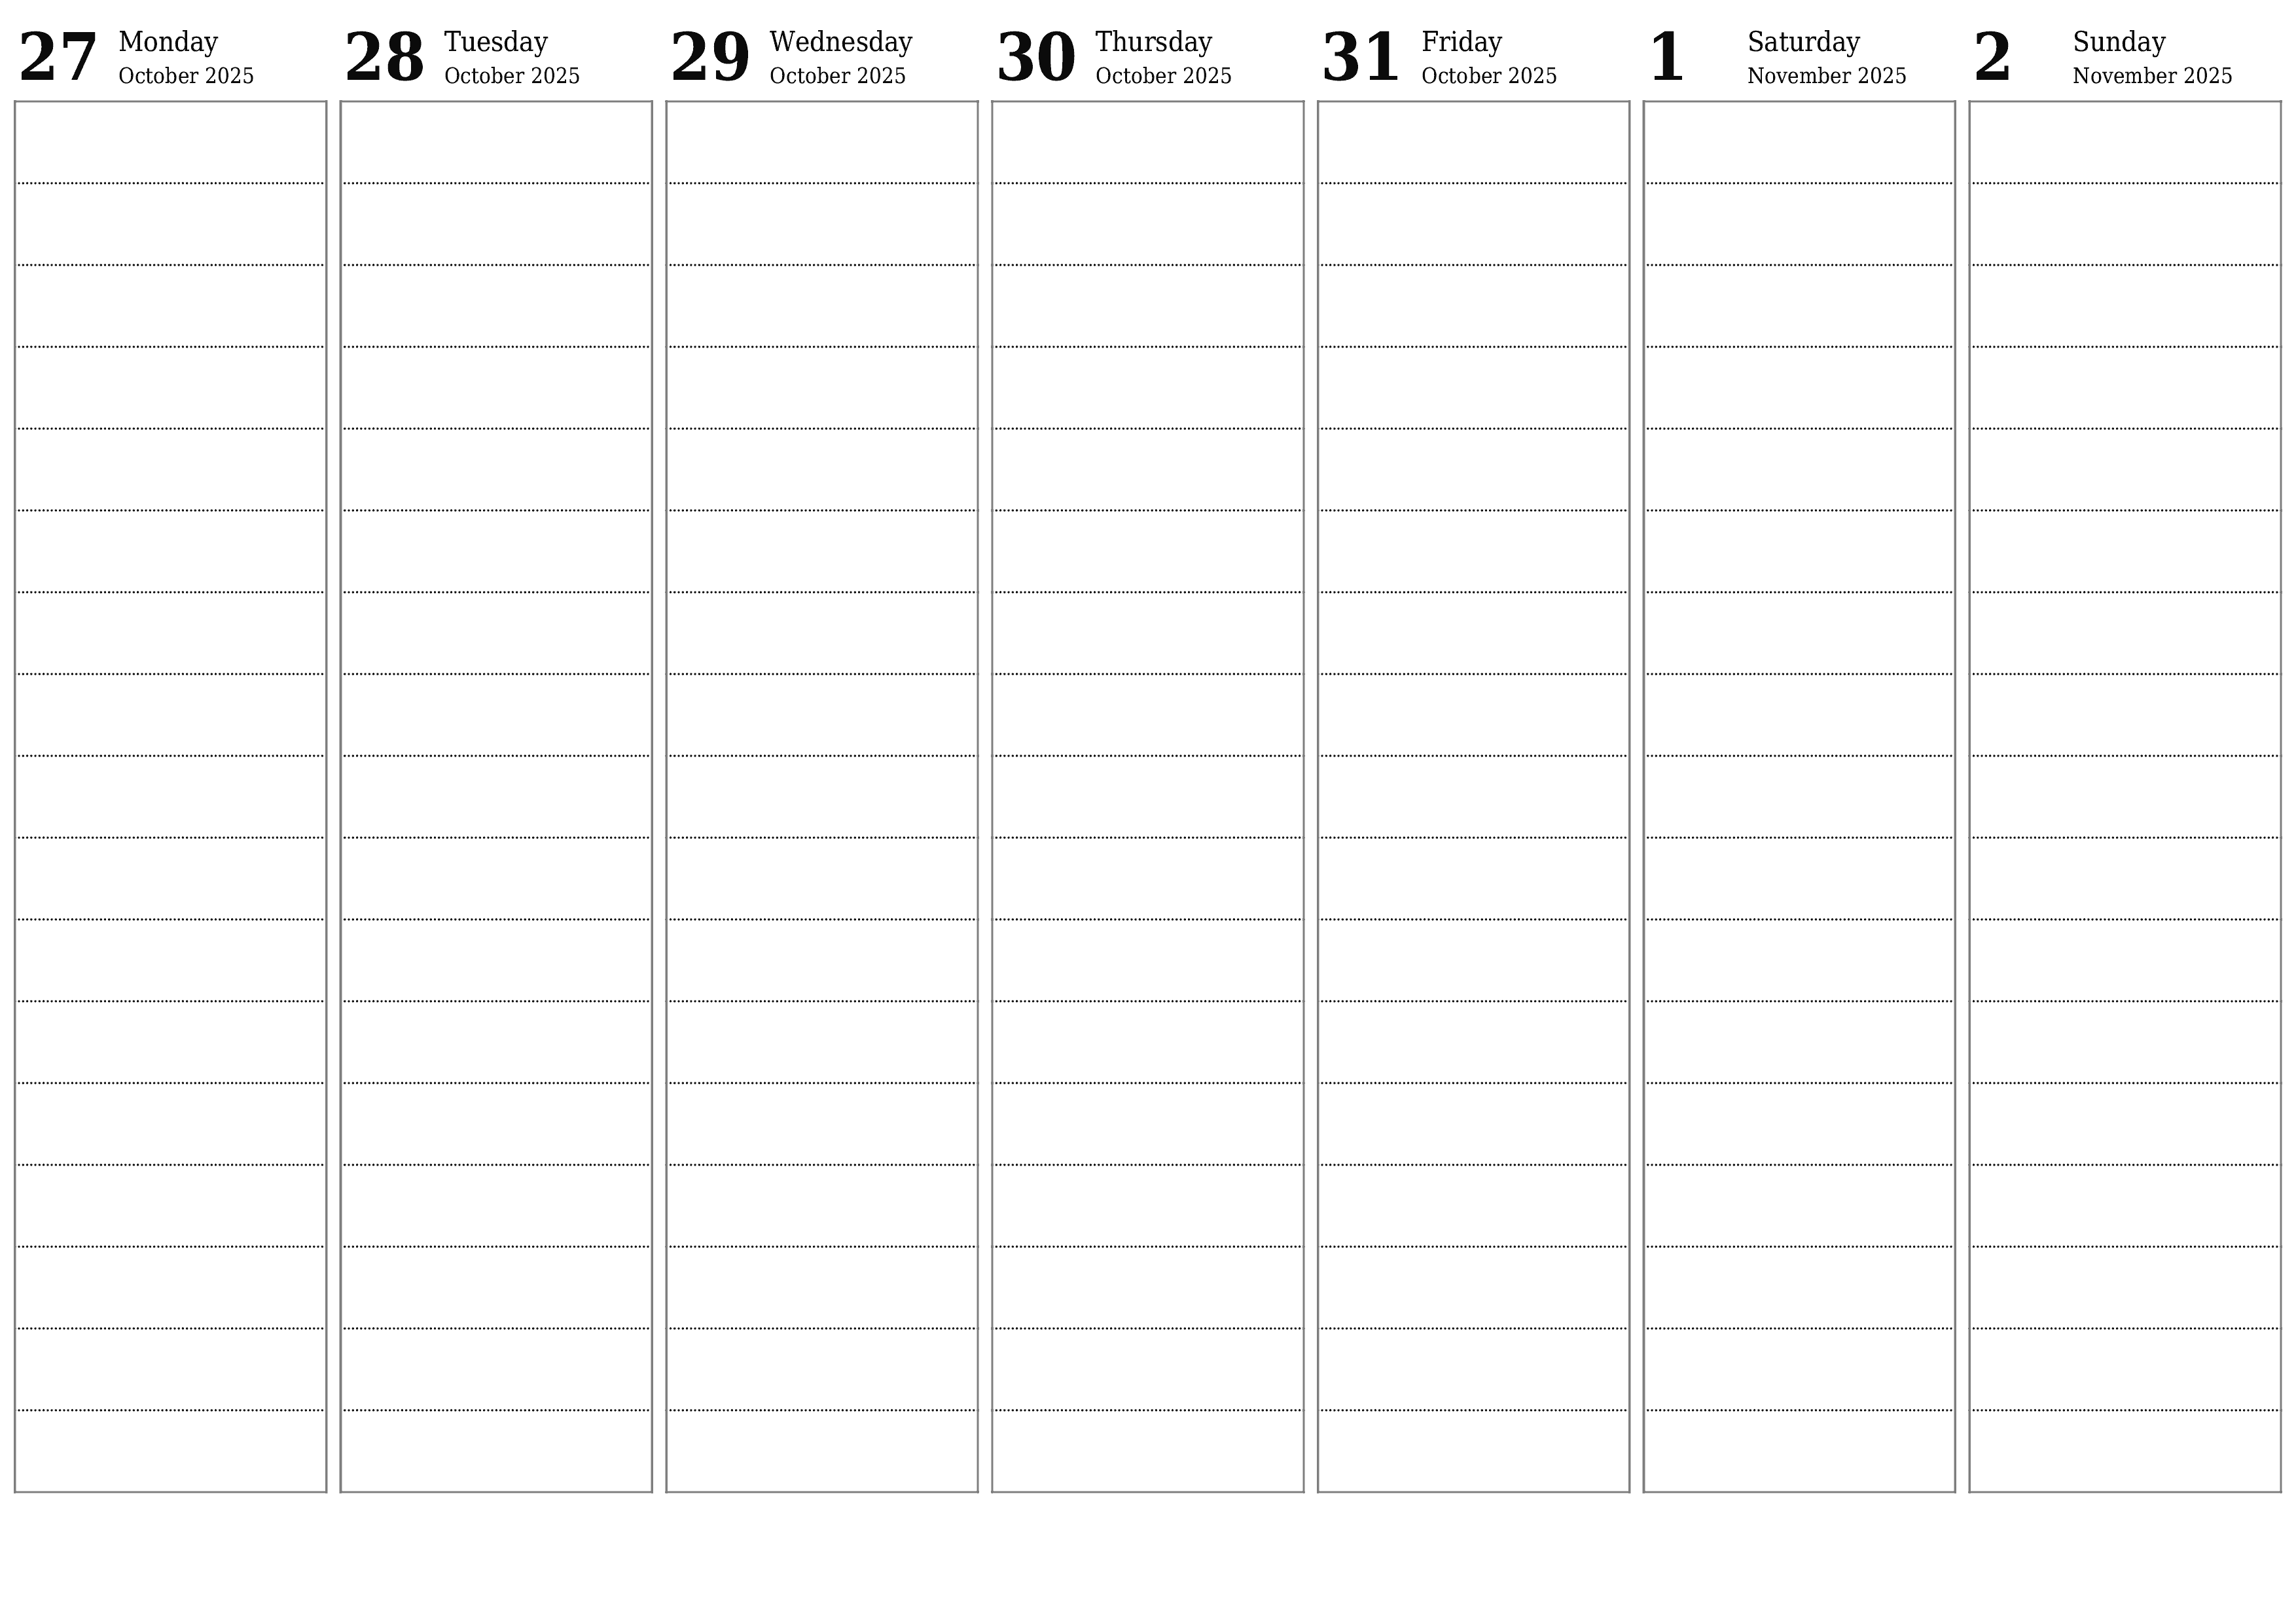 Blank weekly printable calendar and planner for week November 2025 with notes, save and print to PDF PNG English